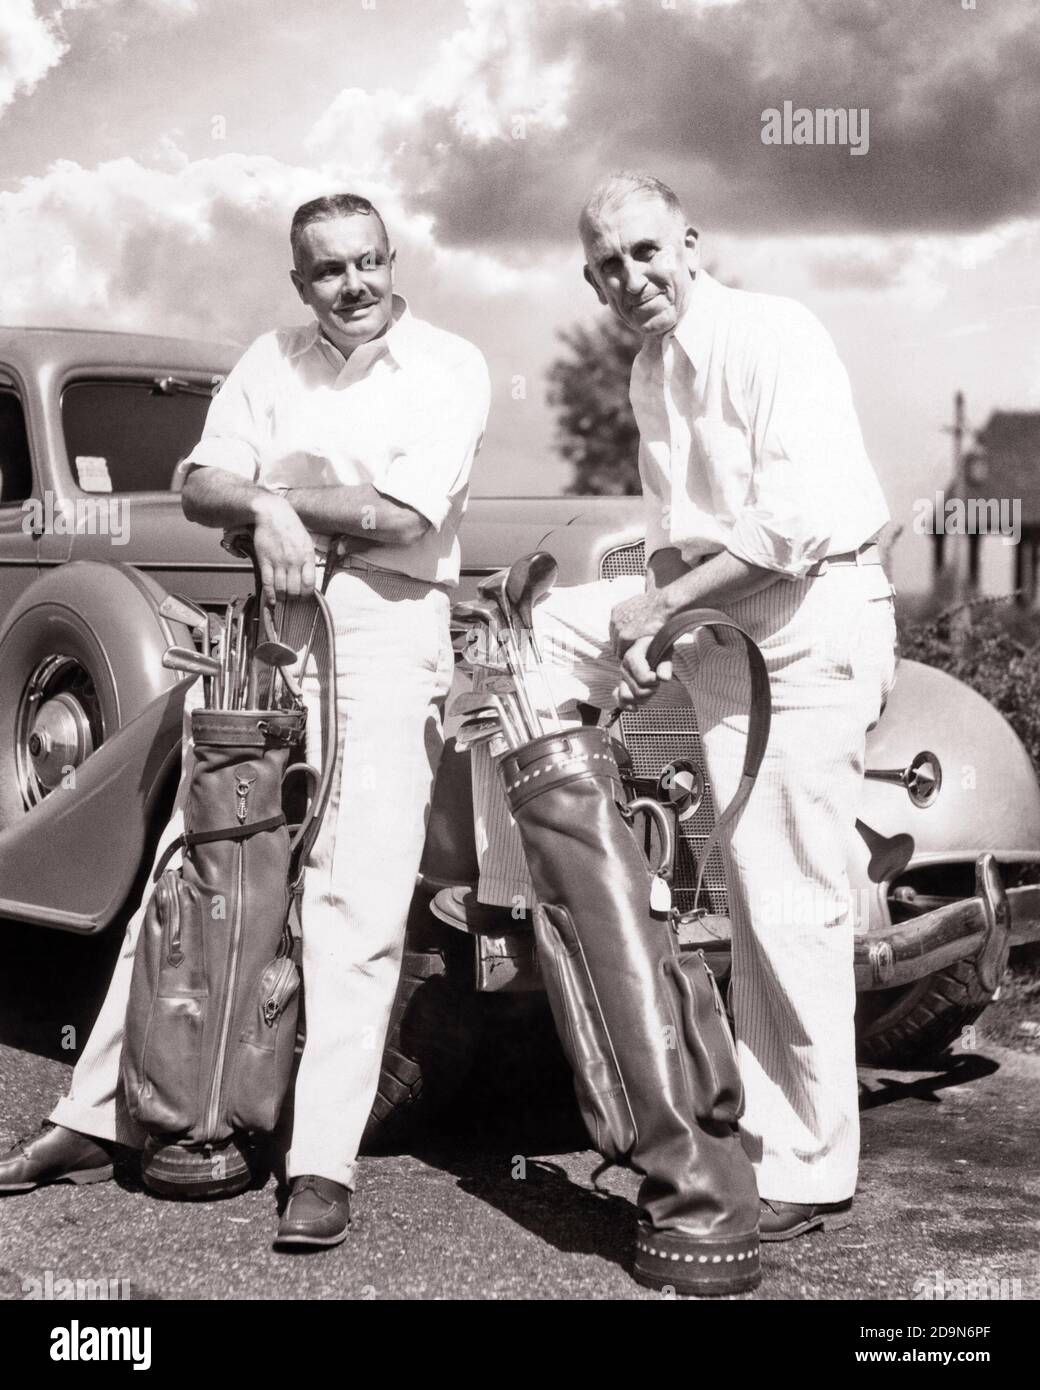 1930s 1940s TWO MATURE CASUALLY DRESSED MEN LEANING ON AUTOMOBILE FENDER EACH HOLDING GOLF BAG AND CLUBS - g5259 HAR001 HARS FRIEND WEALTHY COMPETITION ATHLETE RELAXING RICH PLEASED JOY LIFESTYLE SATISFACTION HEALTHINESS LUXURY COPY SPACE FRIENDSHIP FULL-LENGTH PHYSICAL FITNESS PERSONS AUTOMOBILE MALES GOLFING ATHLETIC RETIREMENT SENIOR MAN TRANSPORTATION SENIOR ADULT MIDDLE-AGED B&W CLUBS MIDDLE-AGED MAN RETIREE SKILL ACTIVITY AMUSEMENT HAPPINESS PHYSICAL WELLNESS CHEERFUL GOLFERS HOBBY LEISURE STRENGTH INTEREST AUTOS HOBBIES KNOWLEDGE RECREATION PASTIME PRIDE PLEASURE SMILES CONNECTION Stock Photo